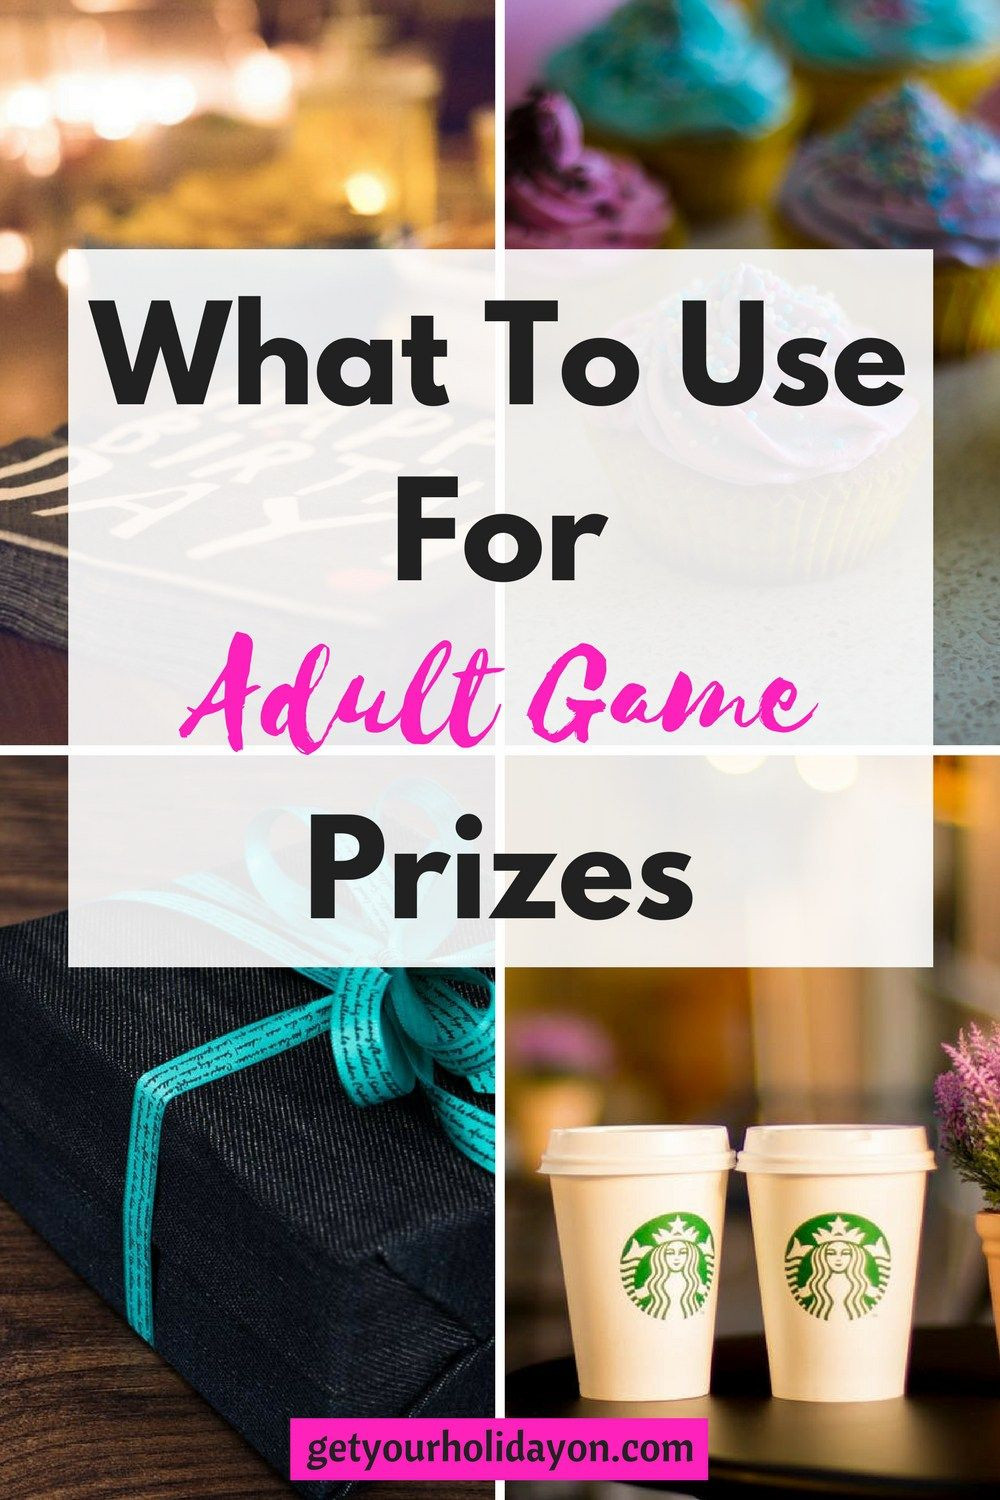 DIY Party Games For Adults
 What To Use For Adult Game Prizes